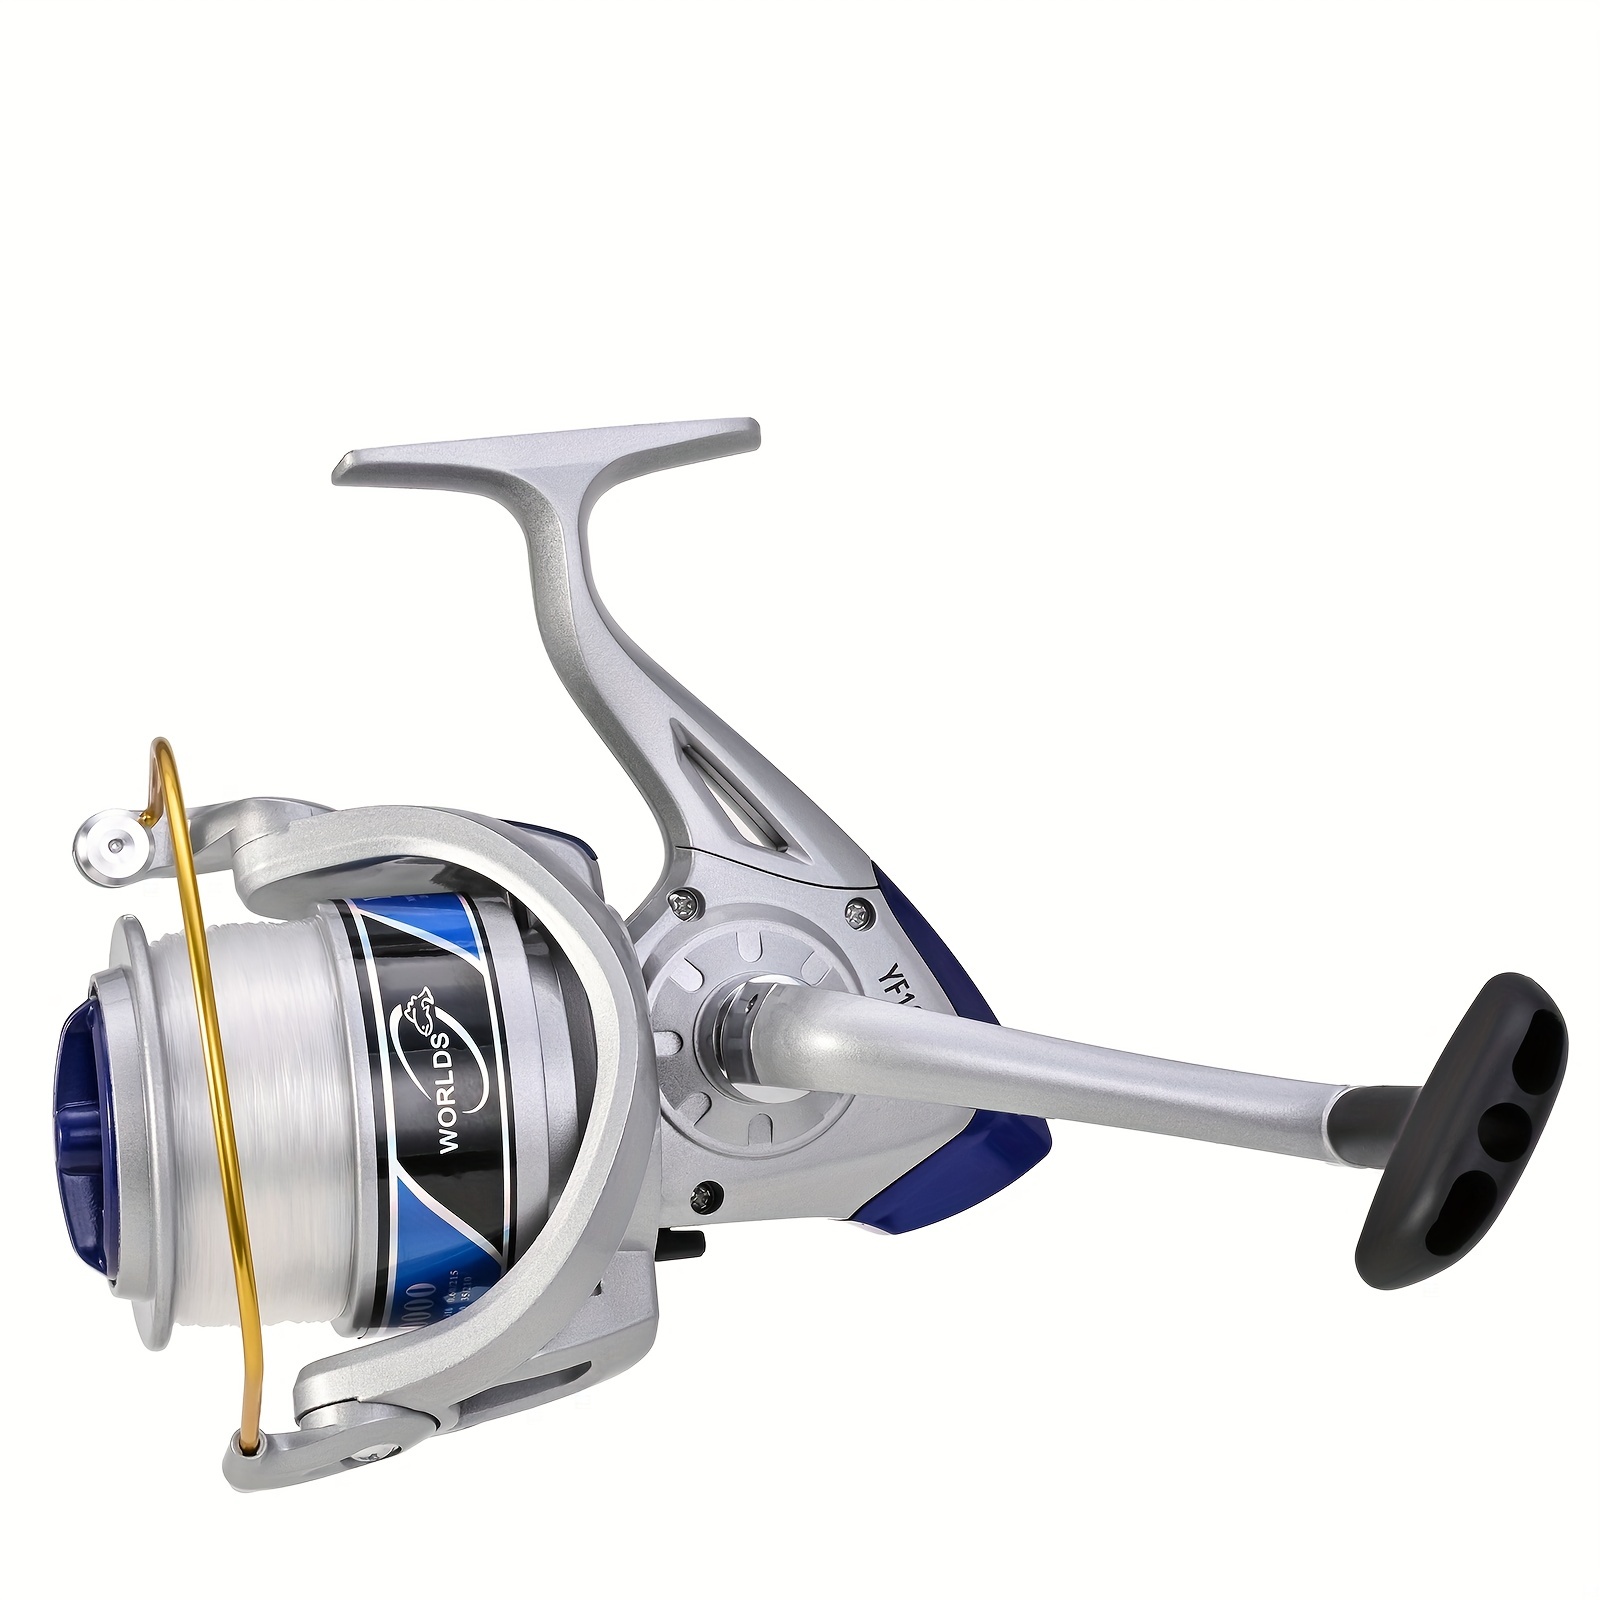 1pc YF10000 Spinning Fishing Reel - Large Capacity, Ultra Smooth, Ideal for  Saltwater and Freshwater Fishing